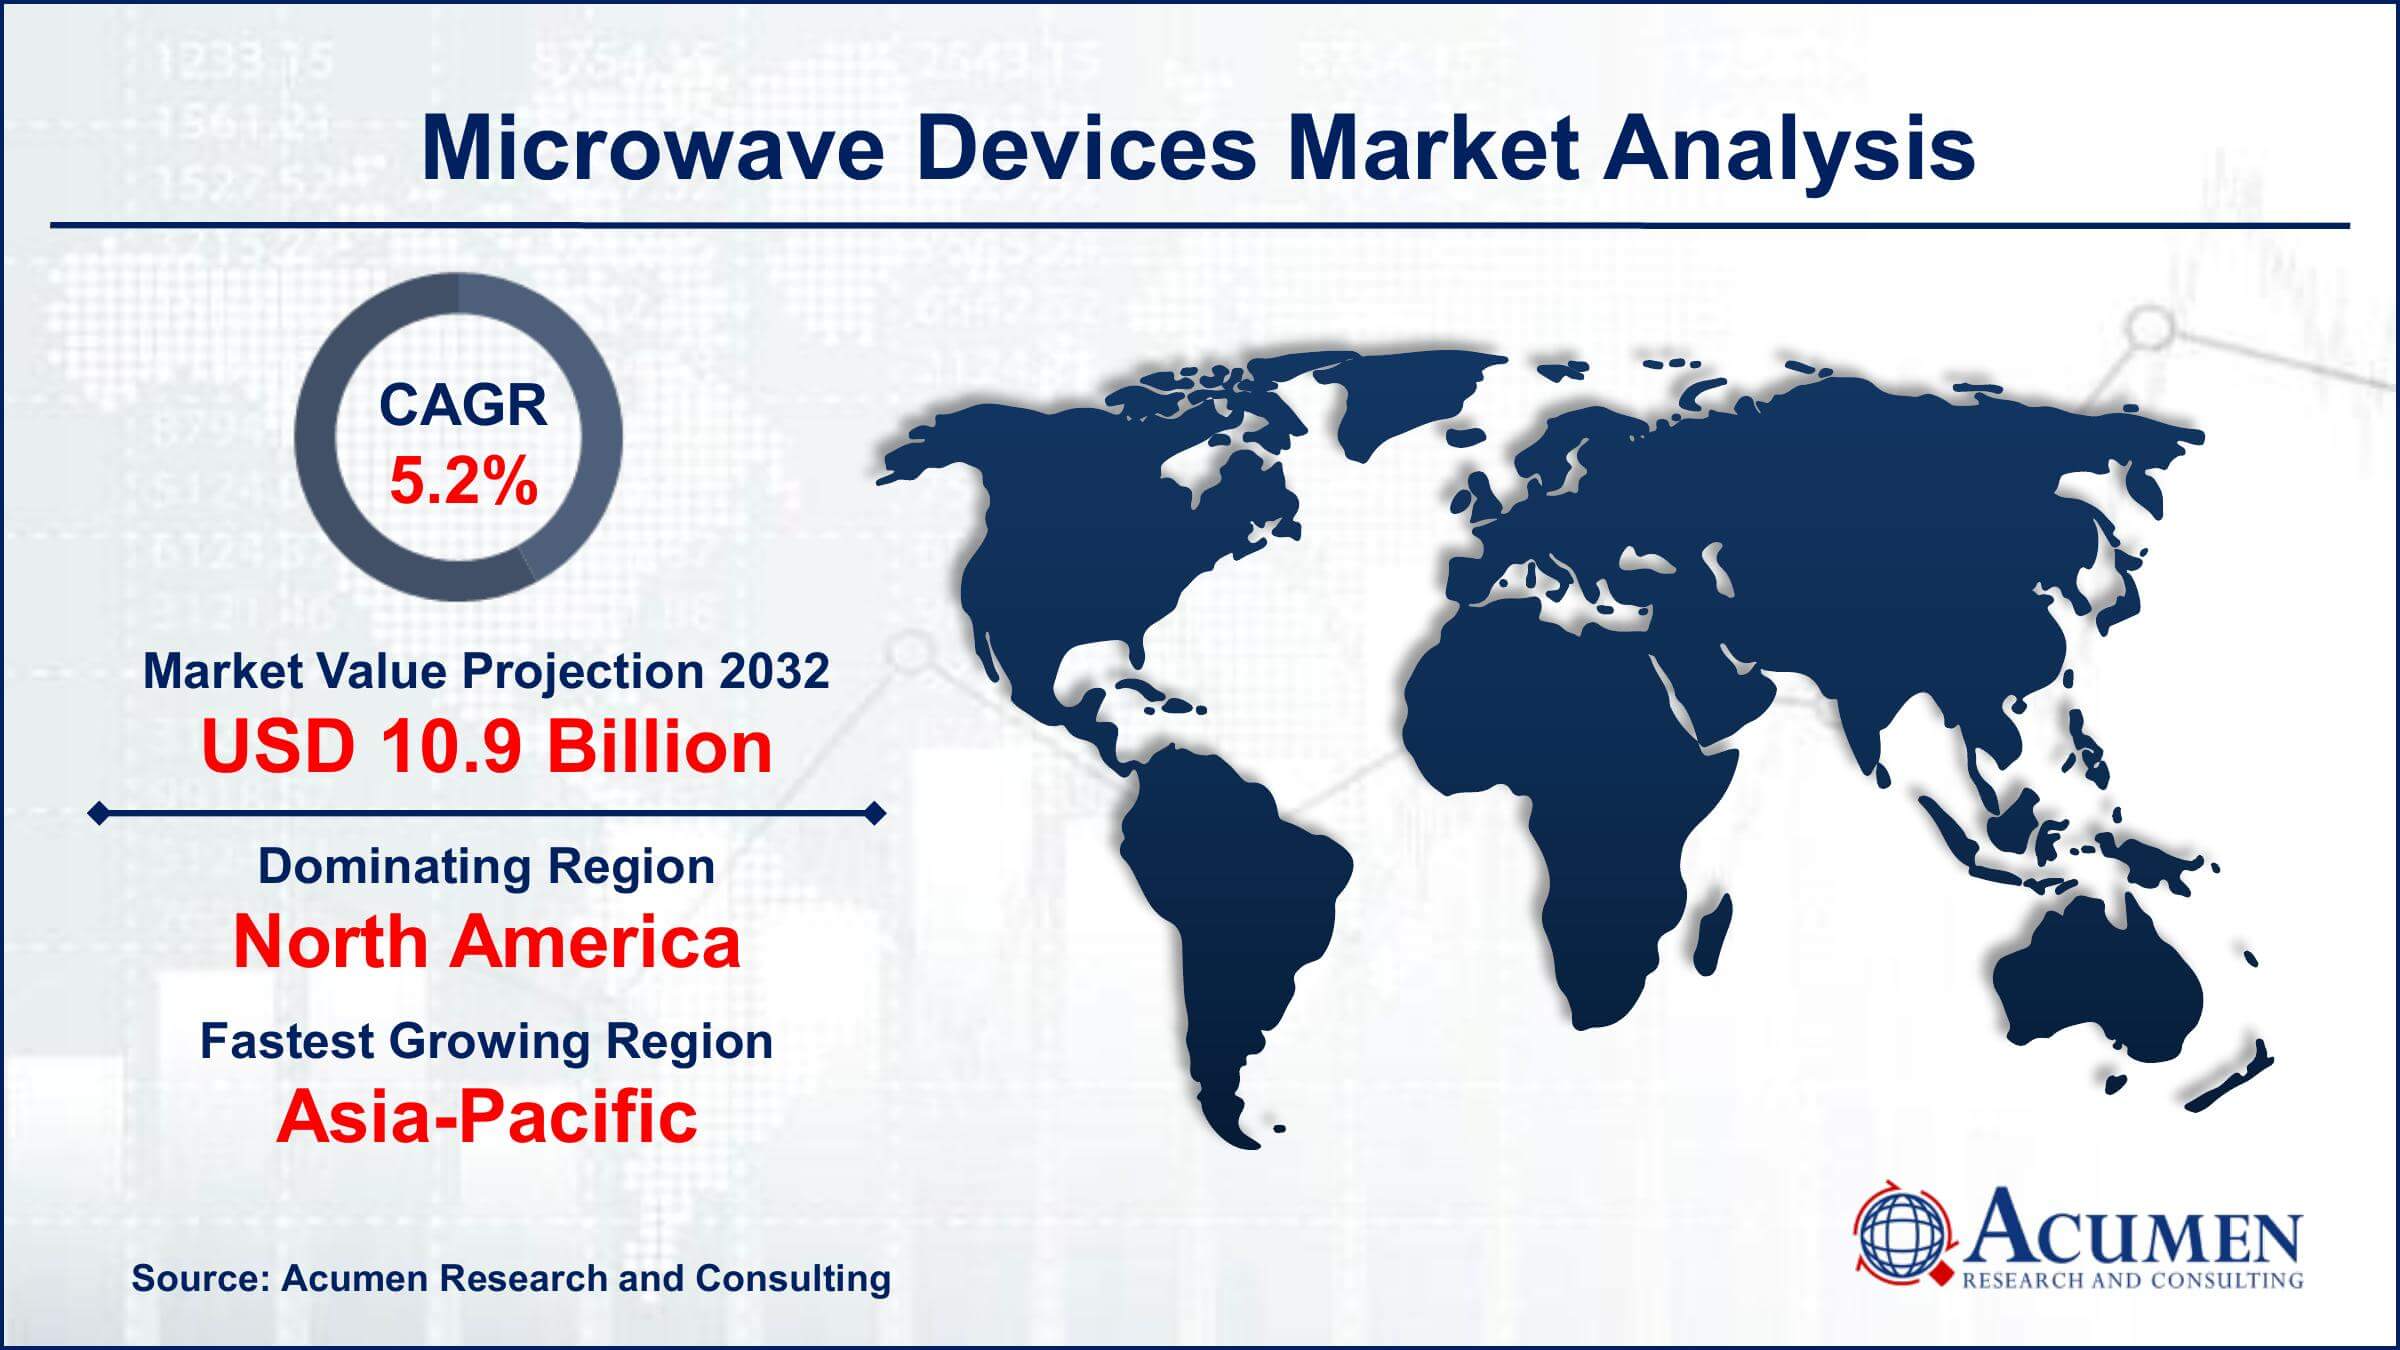 Global Microwave Devices Market Trends